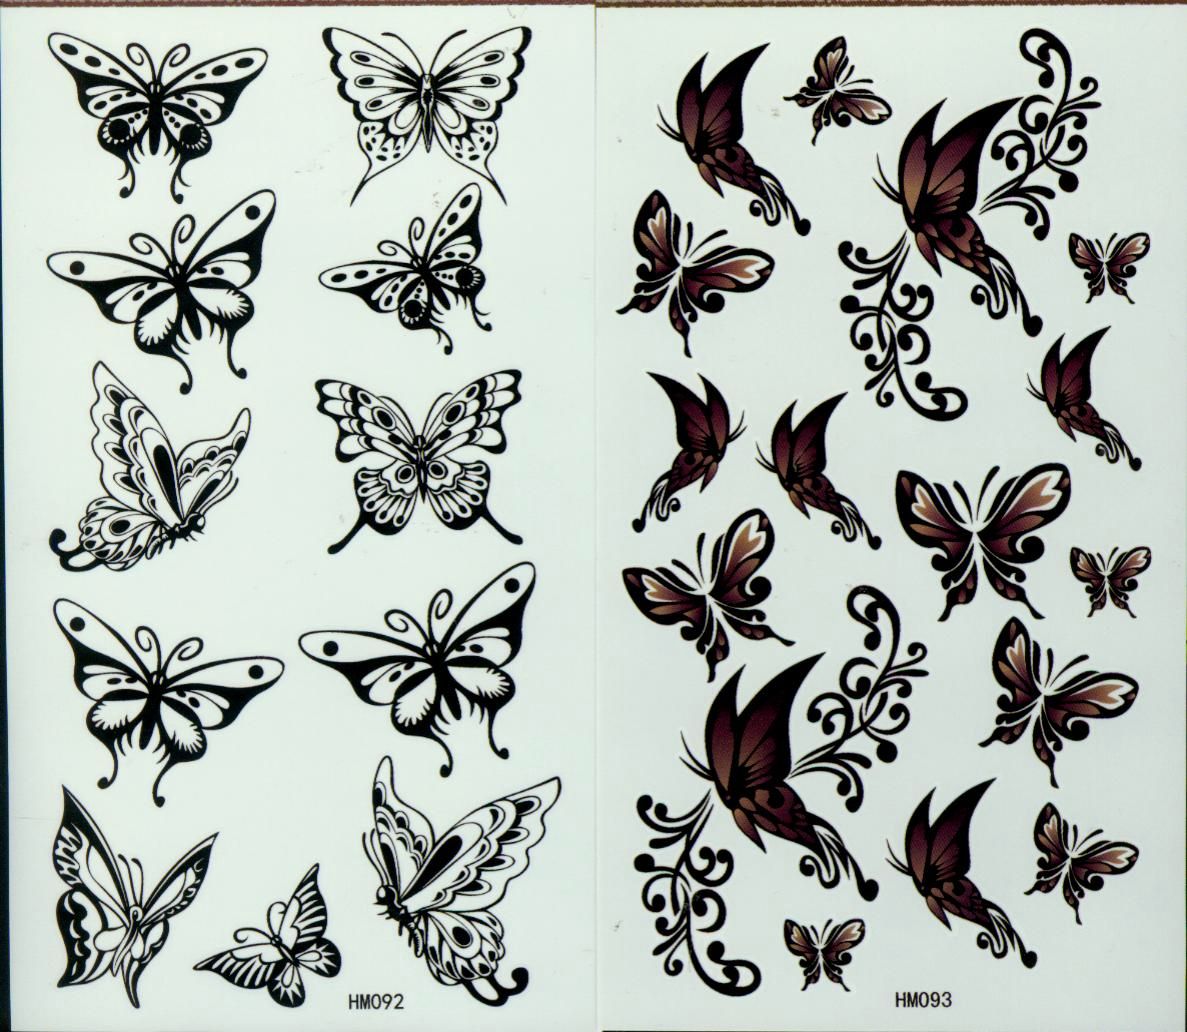 Temporary Tattoos Butterfly Tattoo Stencils For Body Waterproof News Butterfly Tattoos 206*105 mm